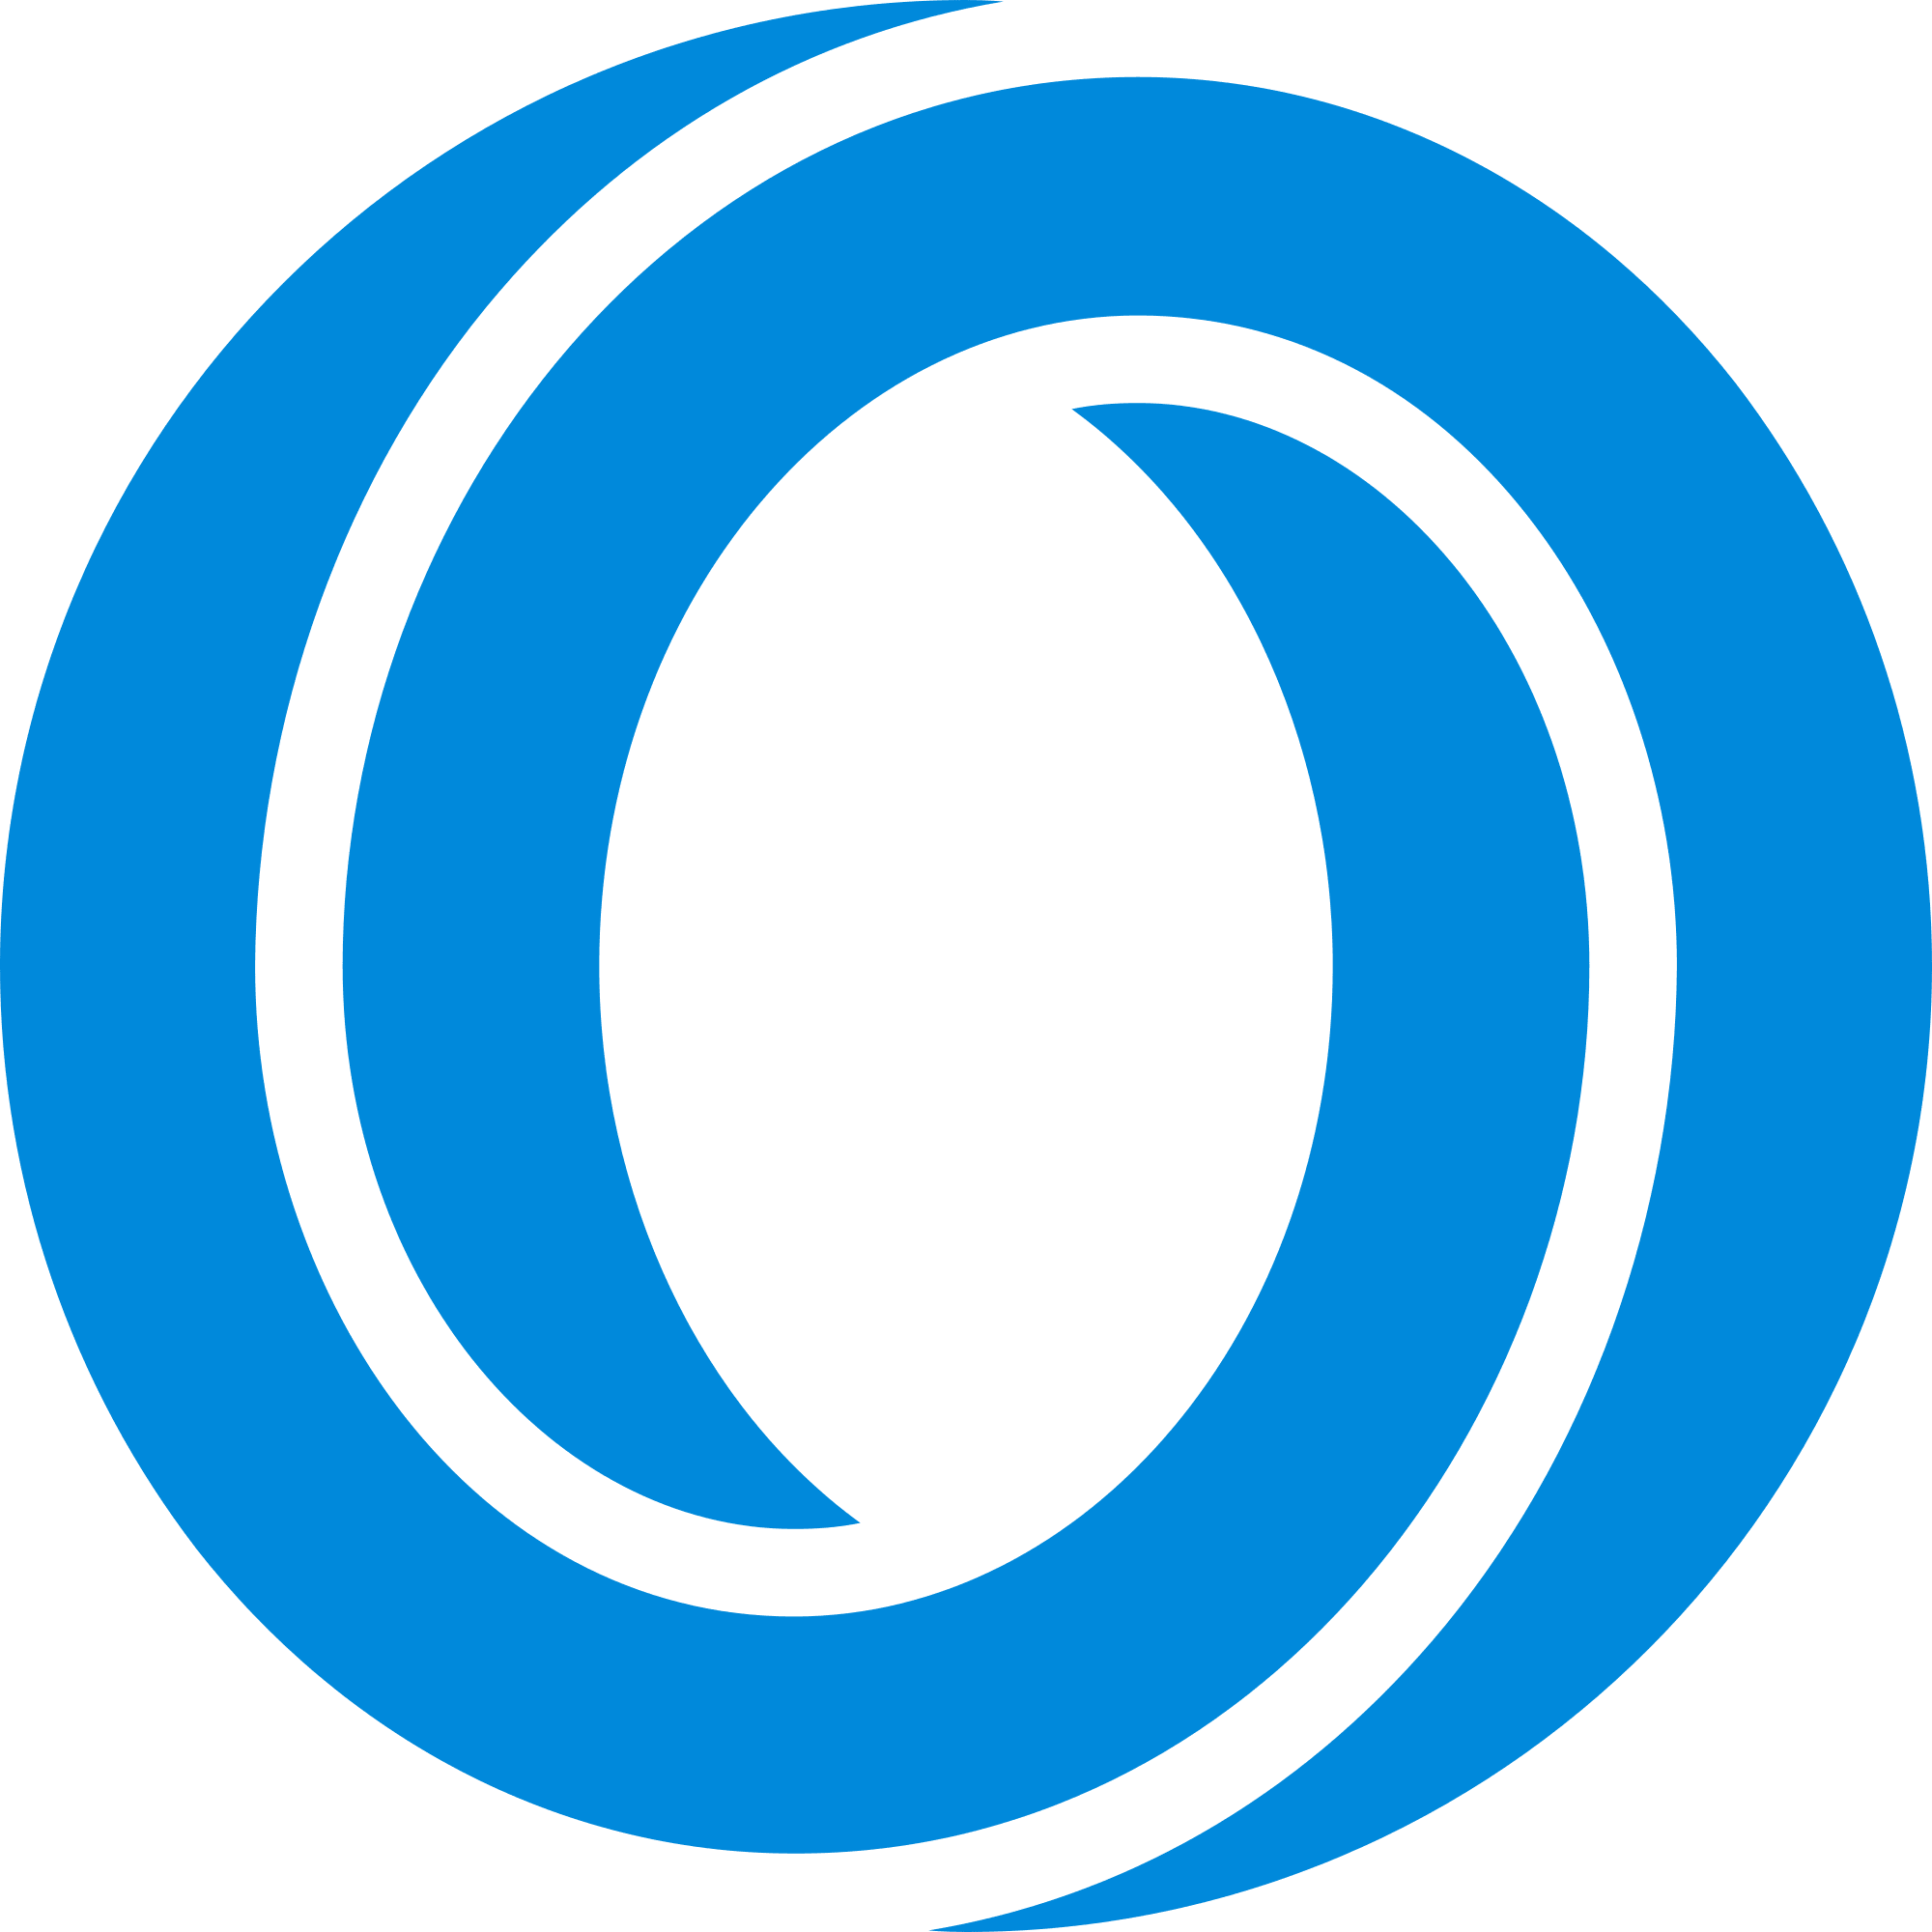 Oasis Network logo in png format